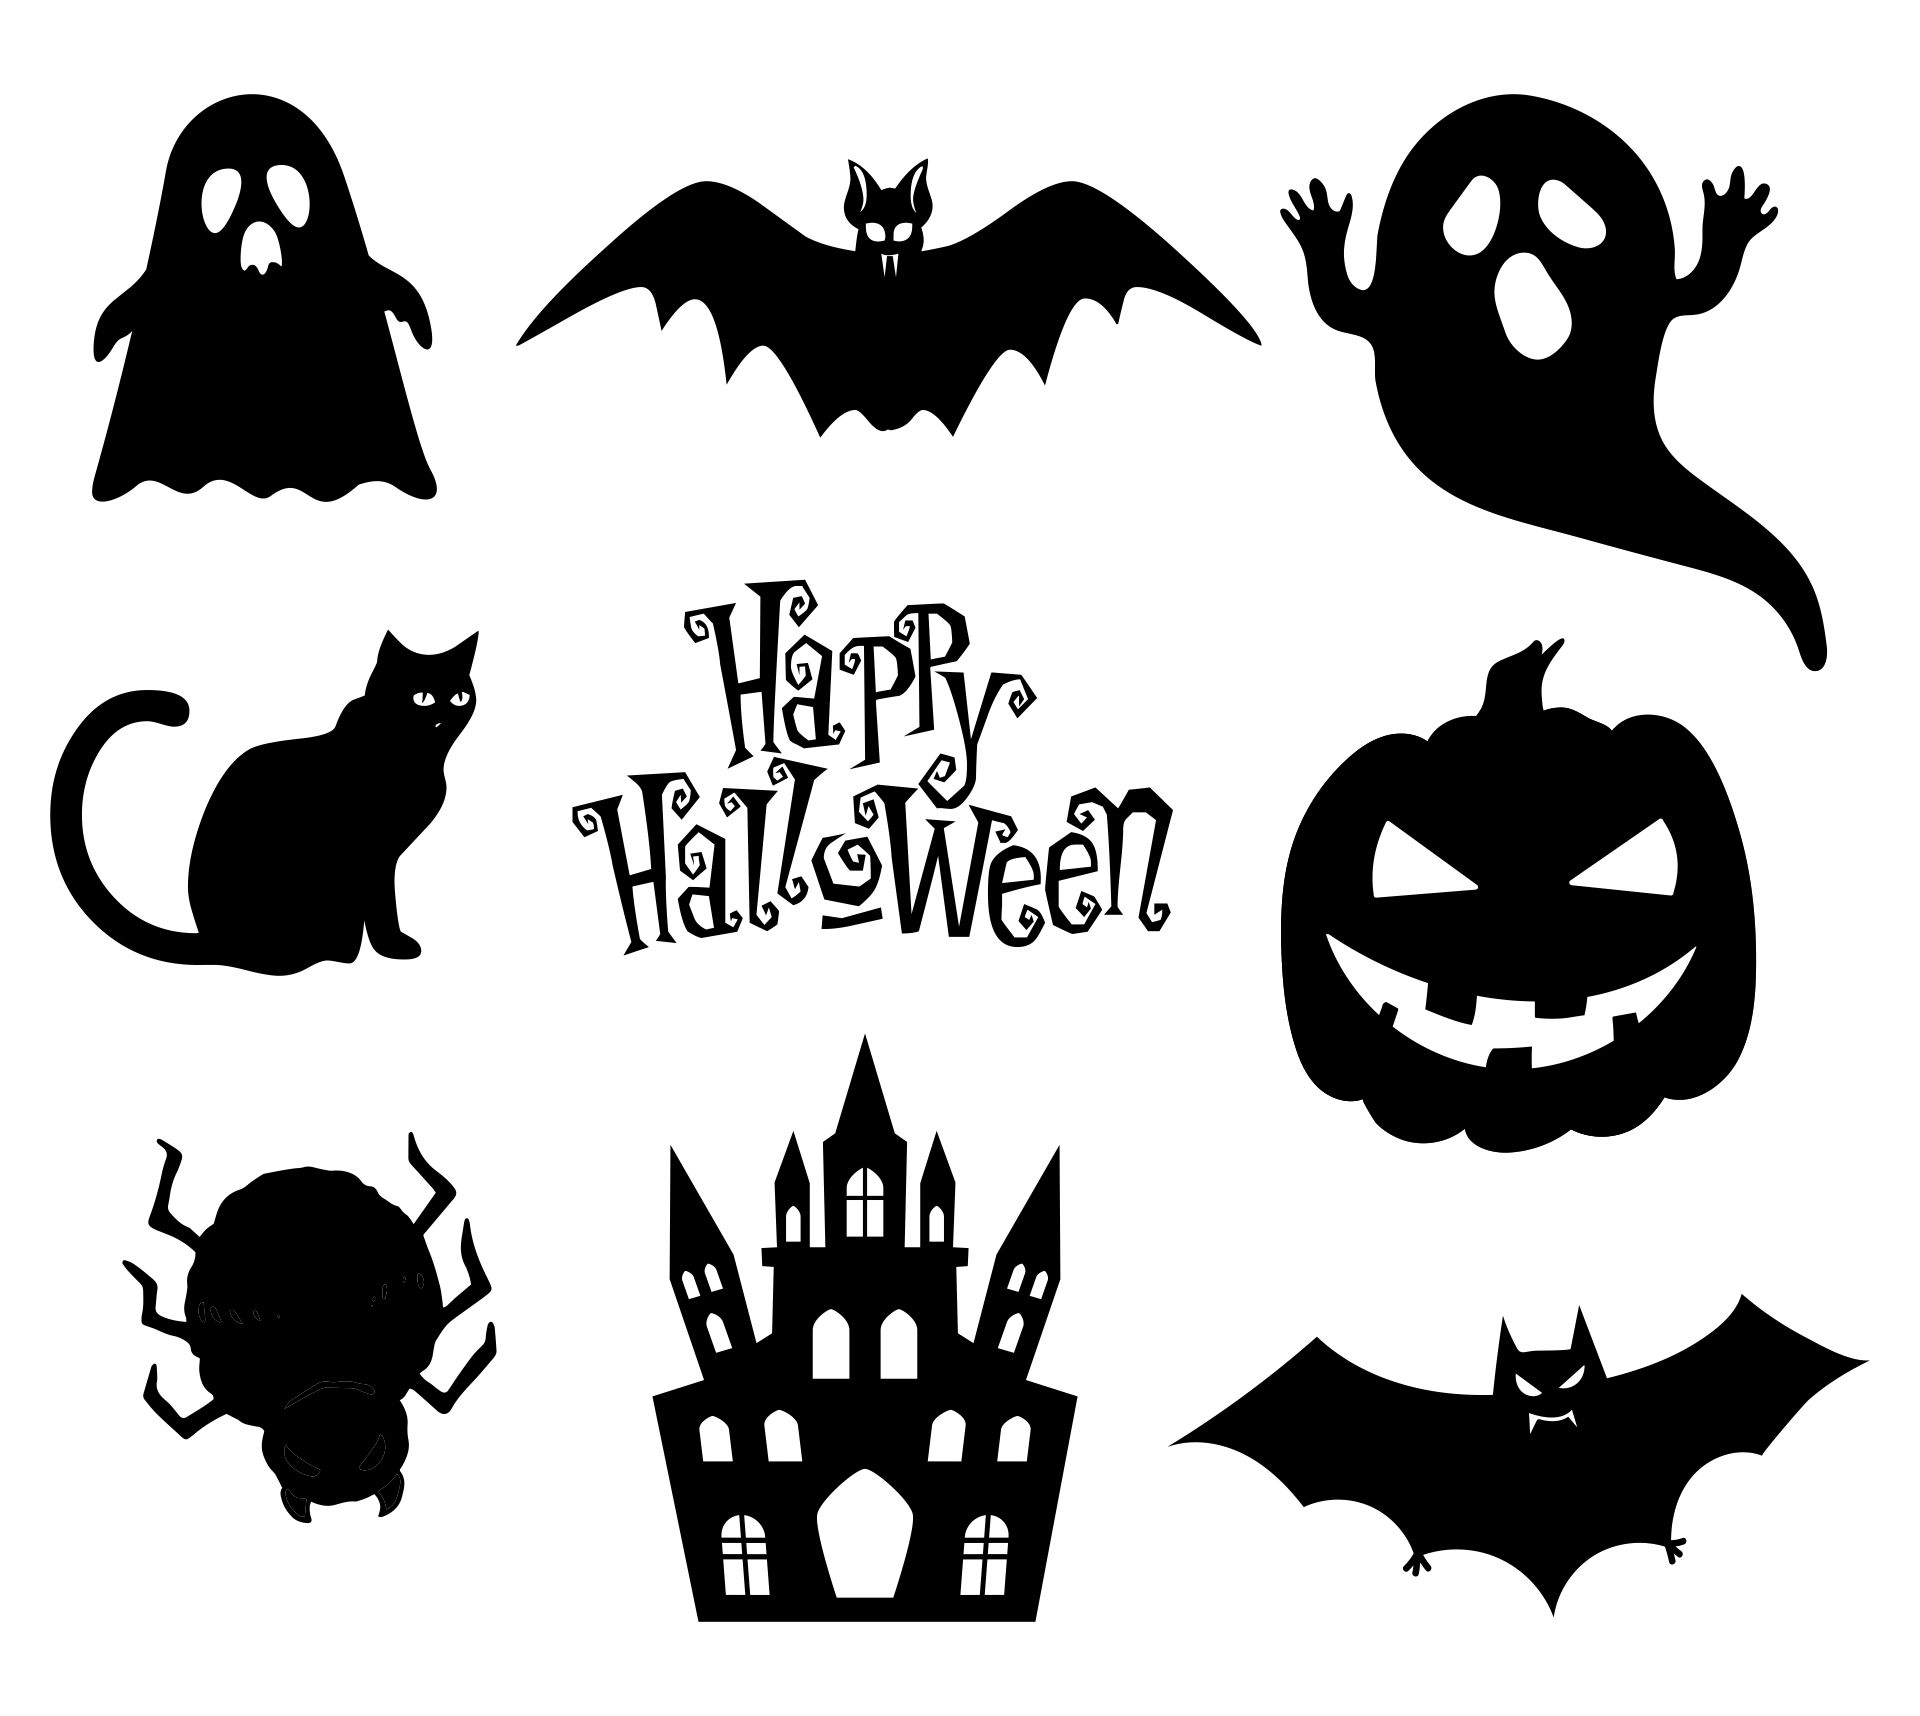 6 Best Images of Printable Halloween Silhouettes - Free Halloween ...